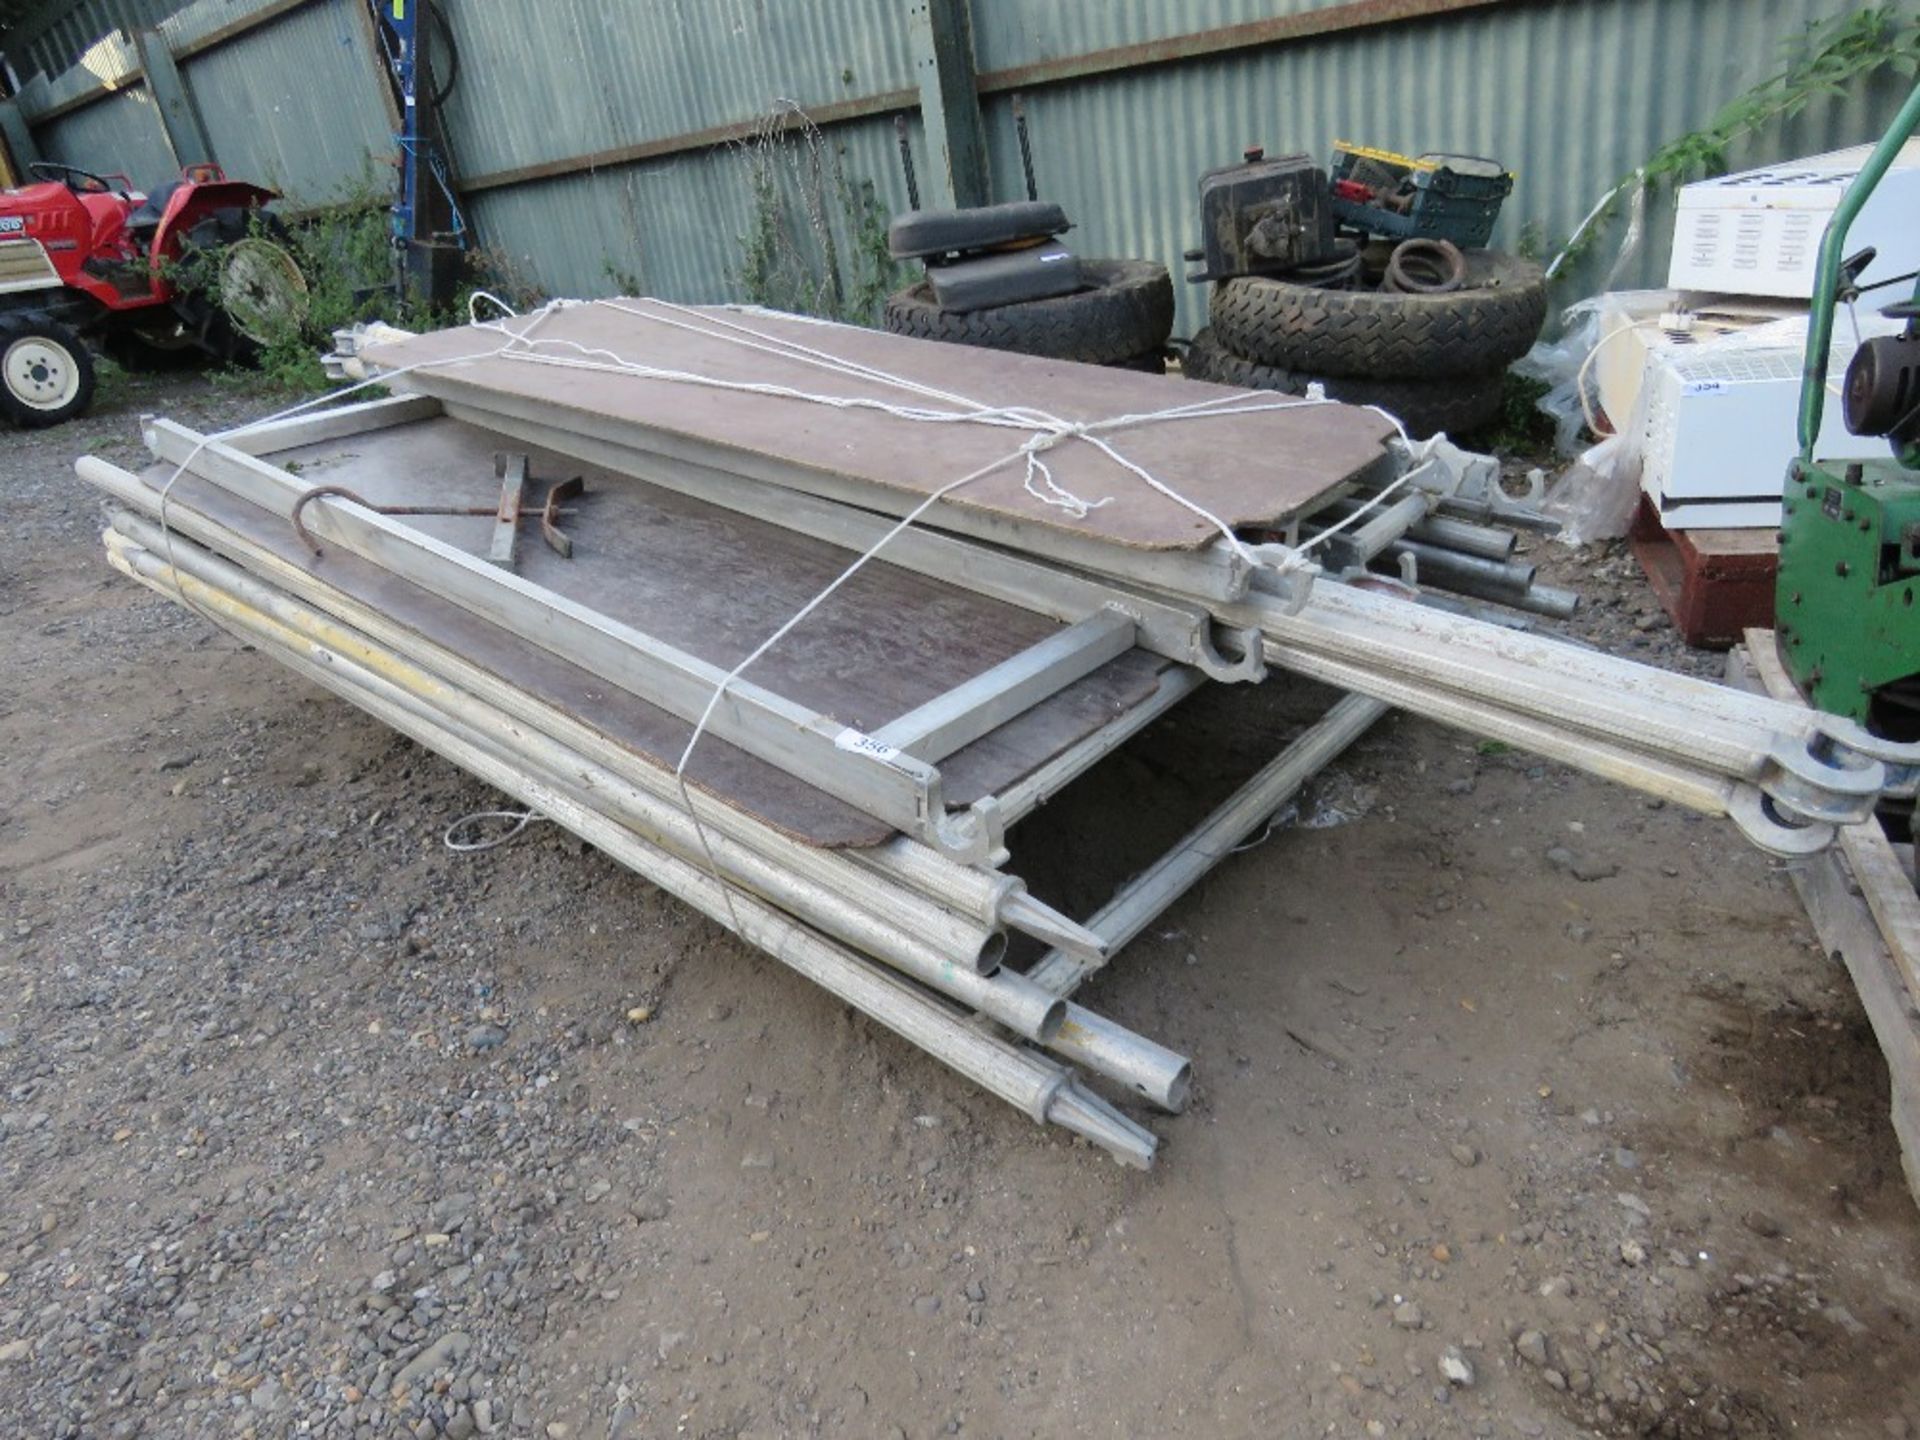 ALUMINIUM SCAFFOLD TOWER WITH BOARDS AND POLES, 6 SECTIONS. OWNER RETIRING. THIS LOT IS SOLD UNDE